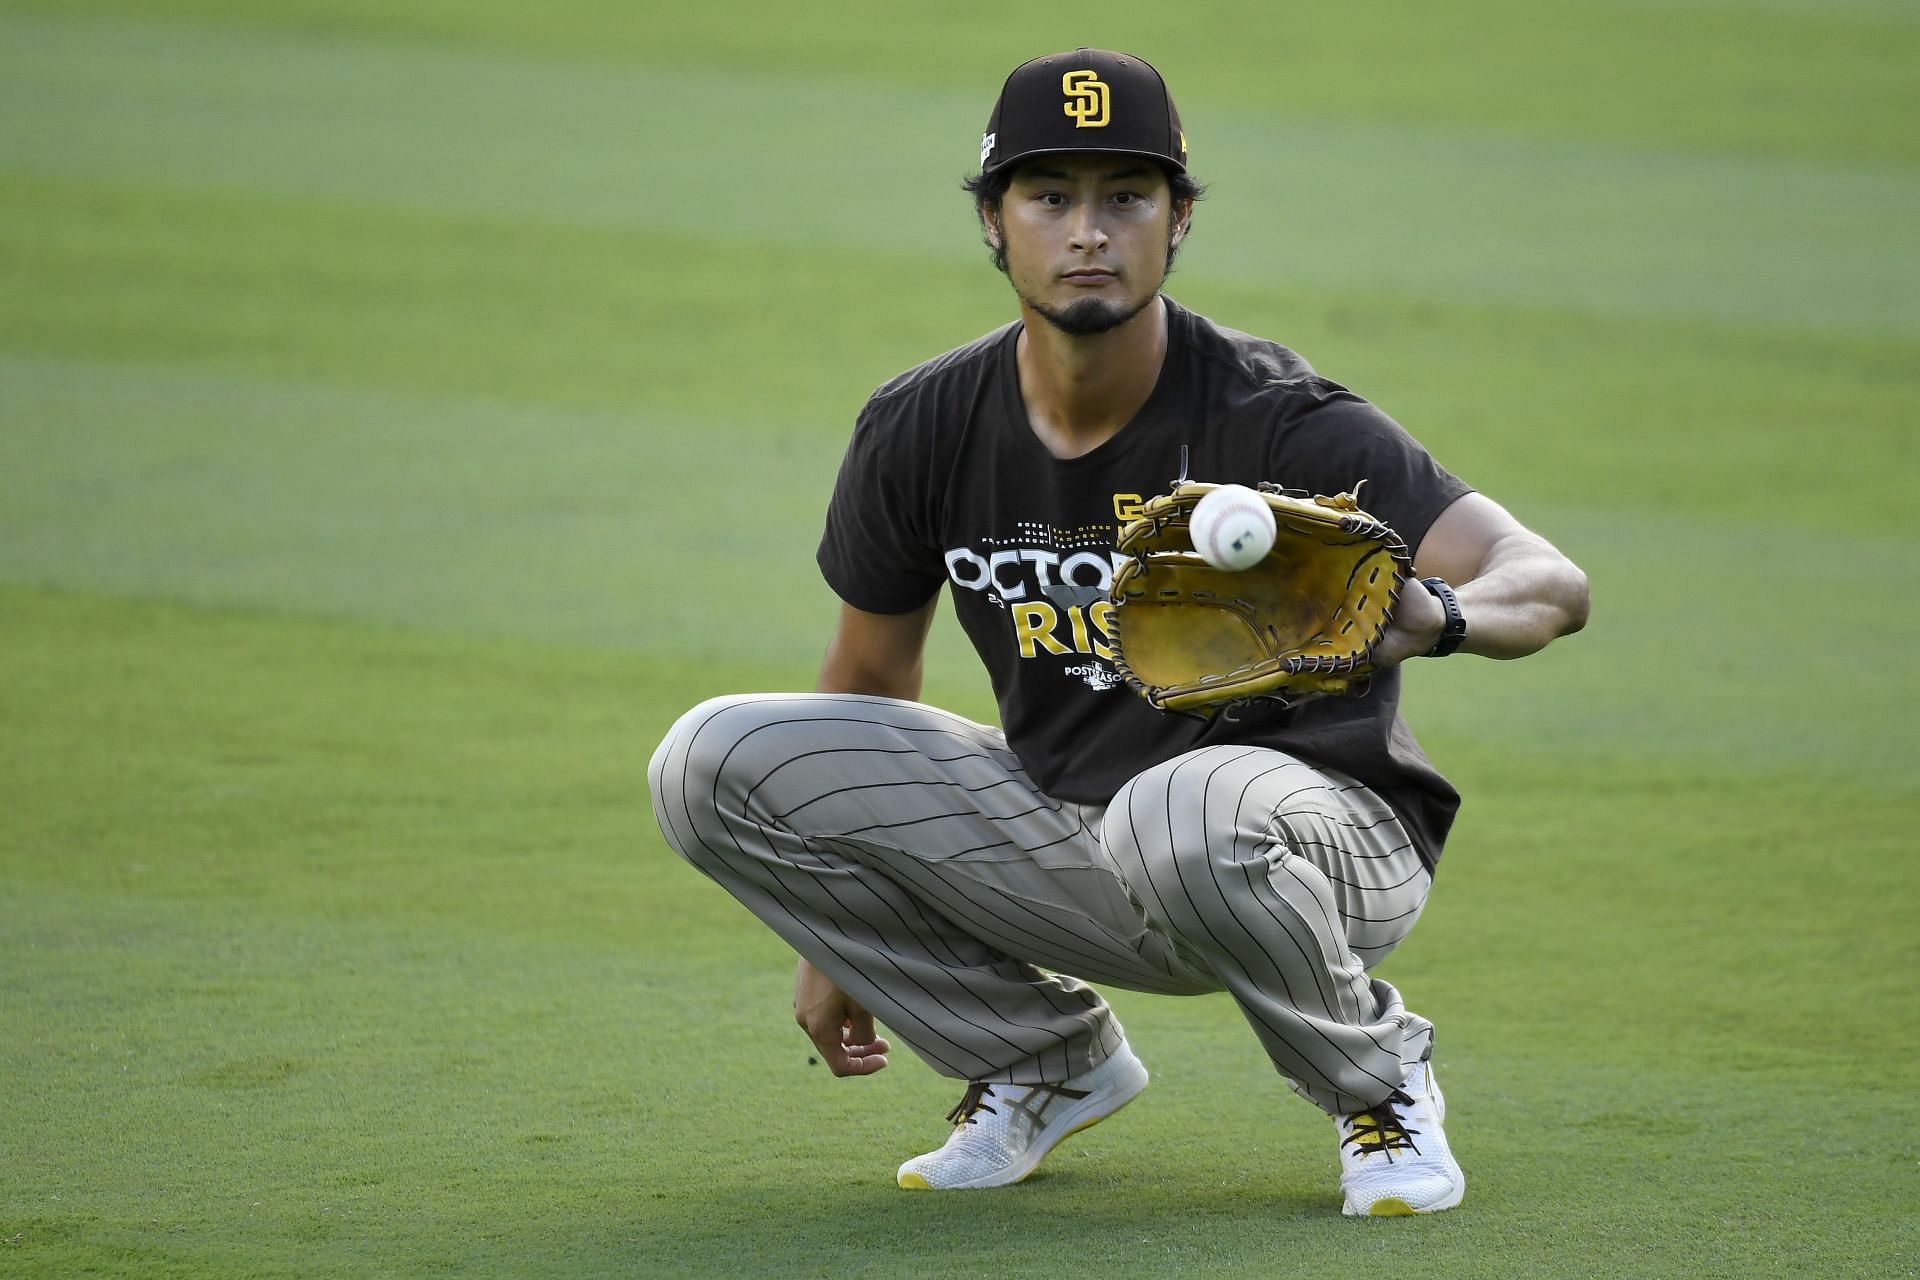 Yu Darvish will start for the San Diego Padres in Game 2.